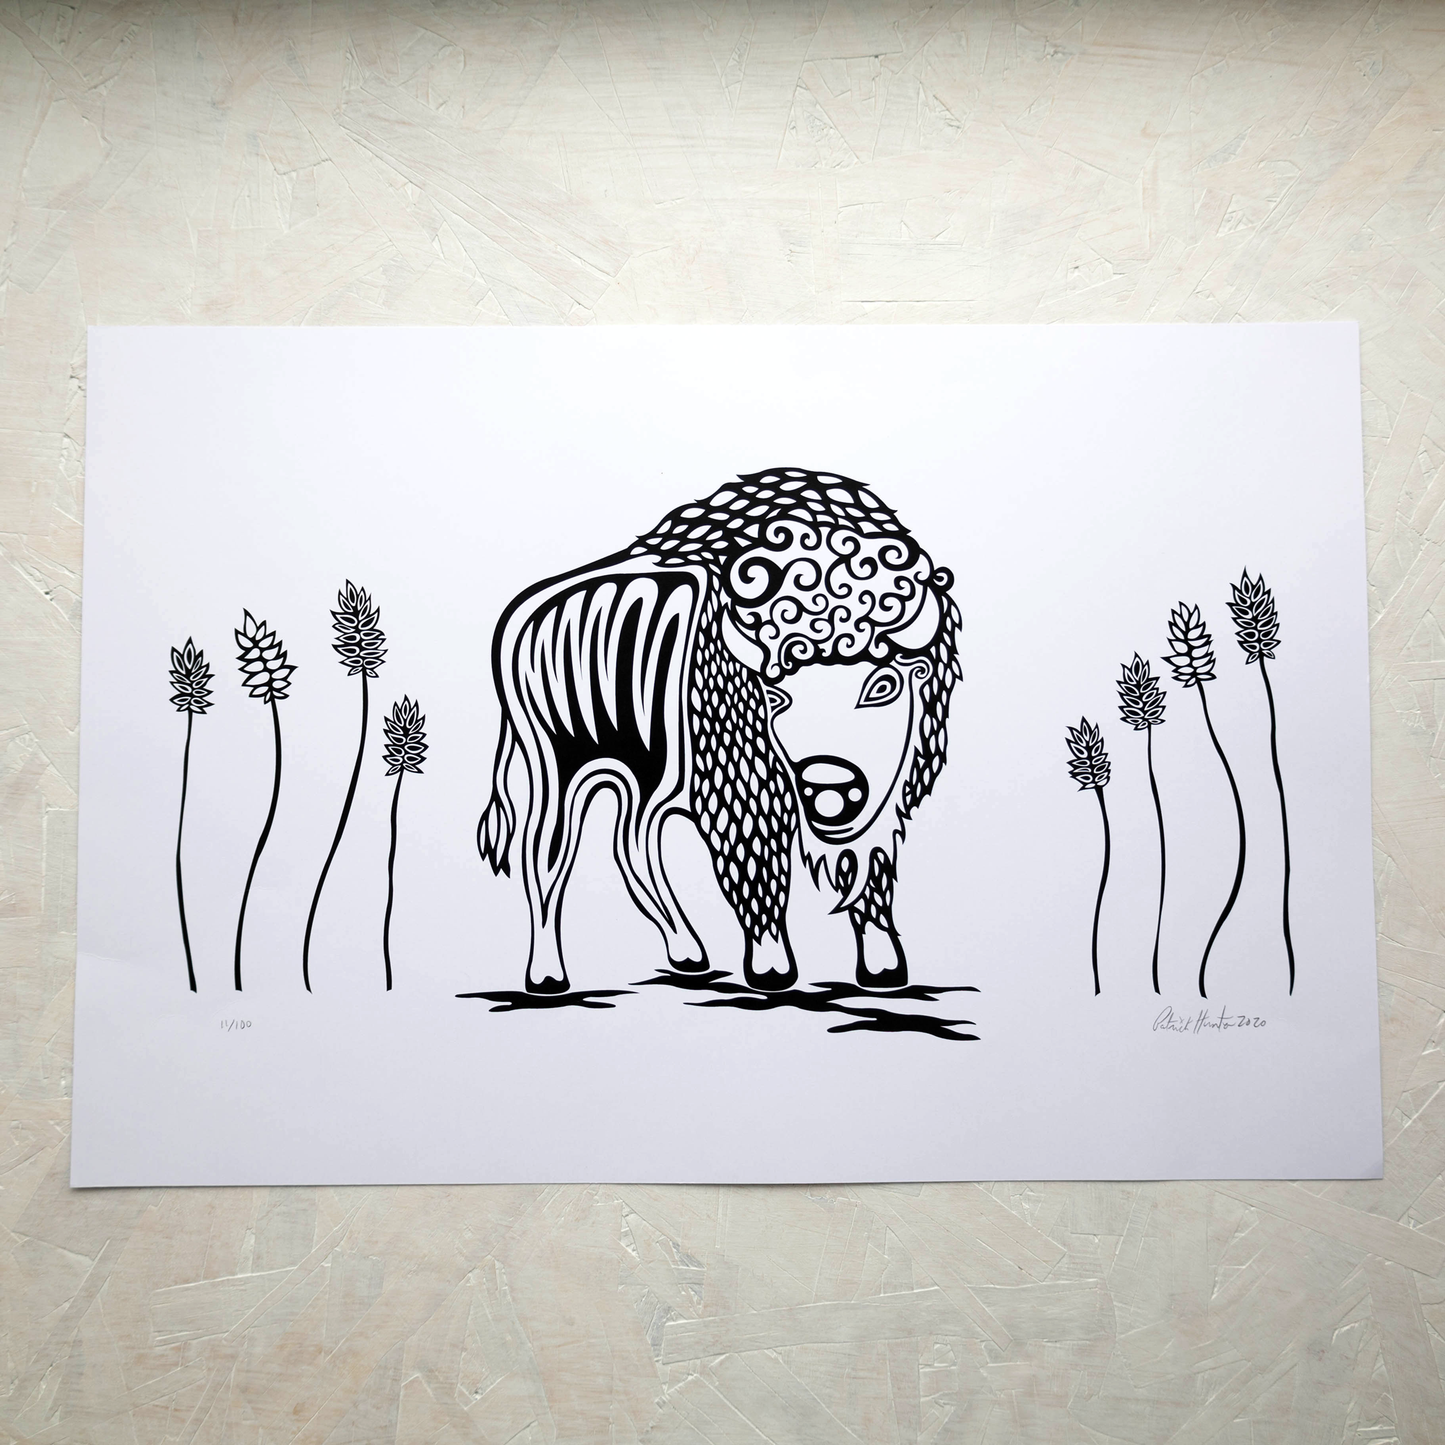 Print of Patrick Hunter's painting of a buffalo amongst tall prairie grass in black and white woodland art style.